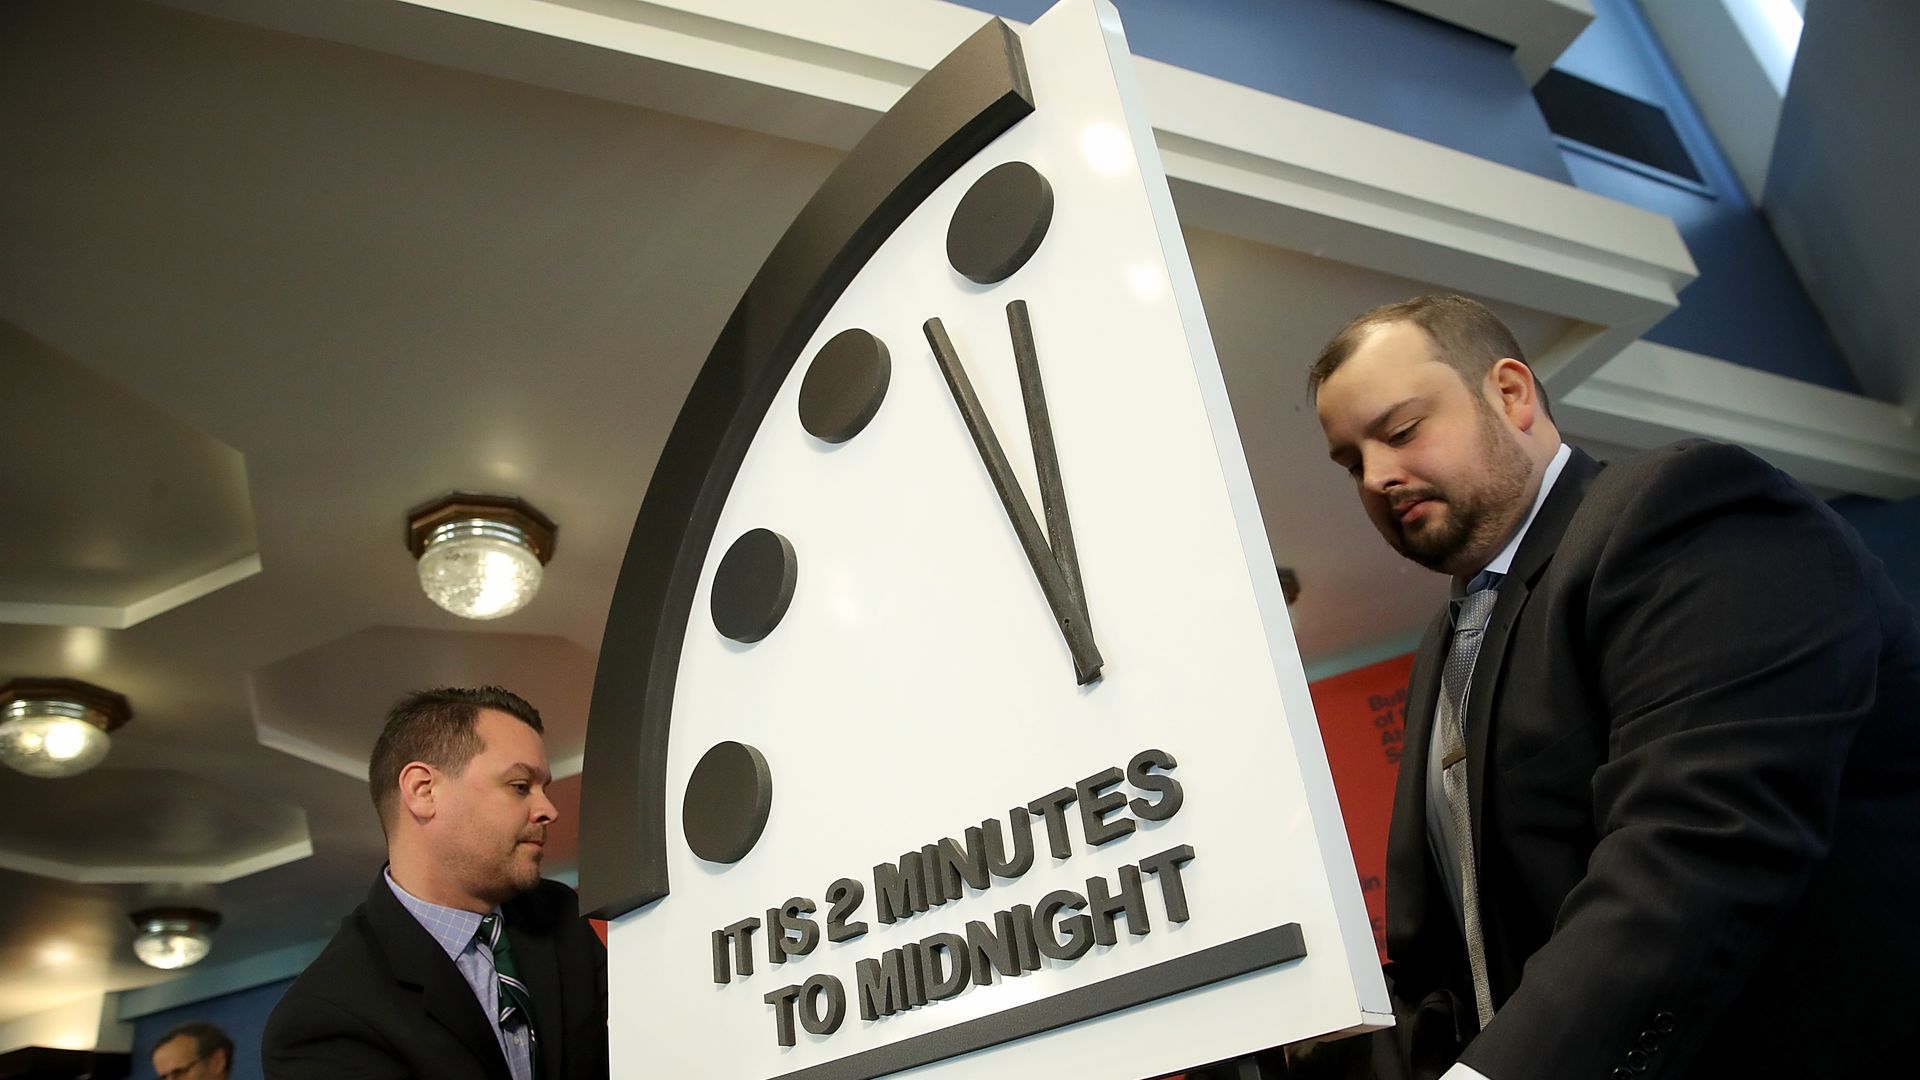 The doomsday clock, reading "it is 2 minutes to midnight"